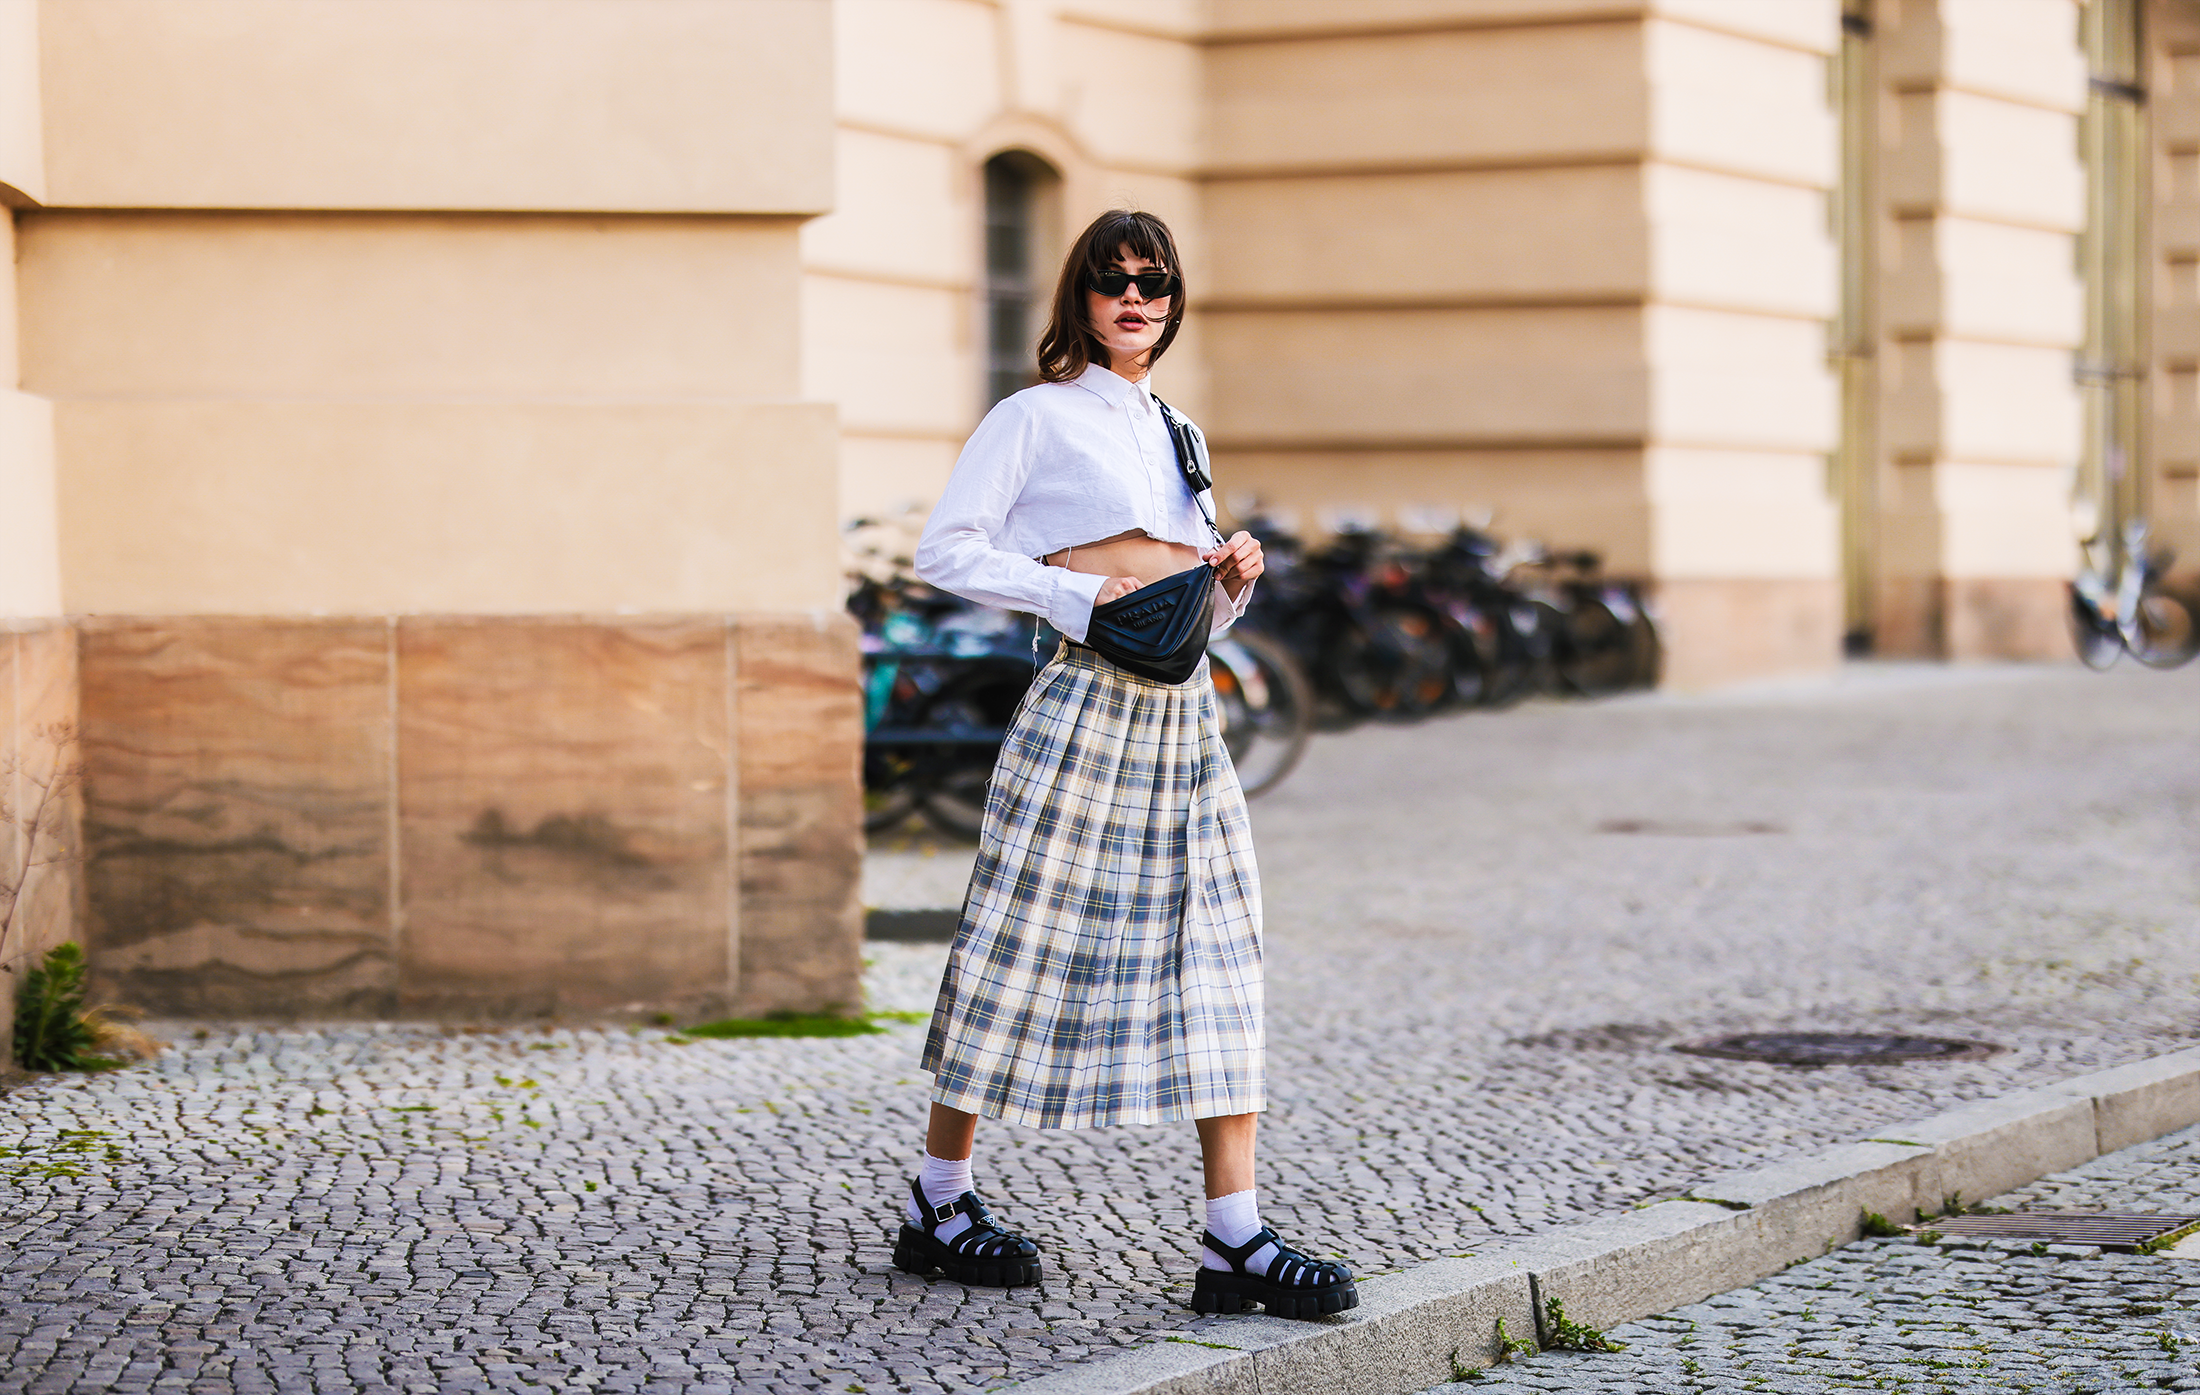 Long Skirt Outfits: 13 Chic Ways To Style The Maxi Skirt